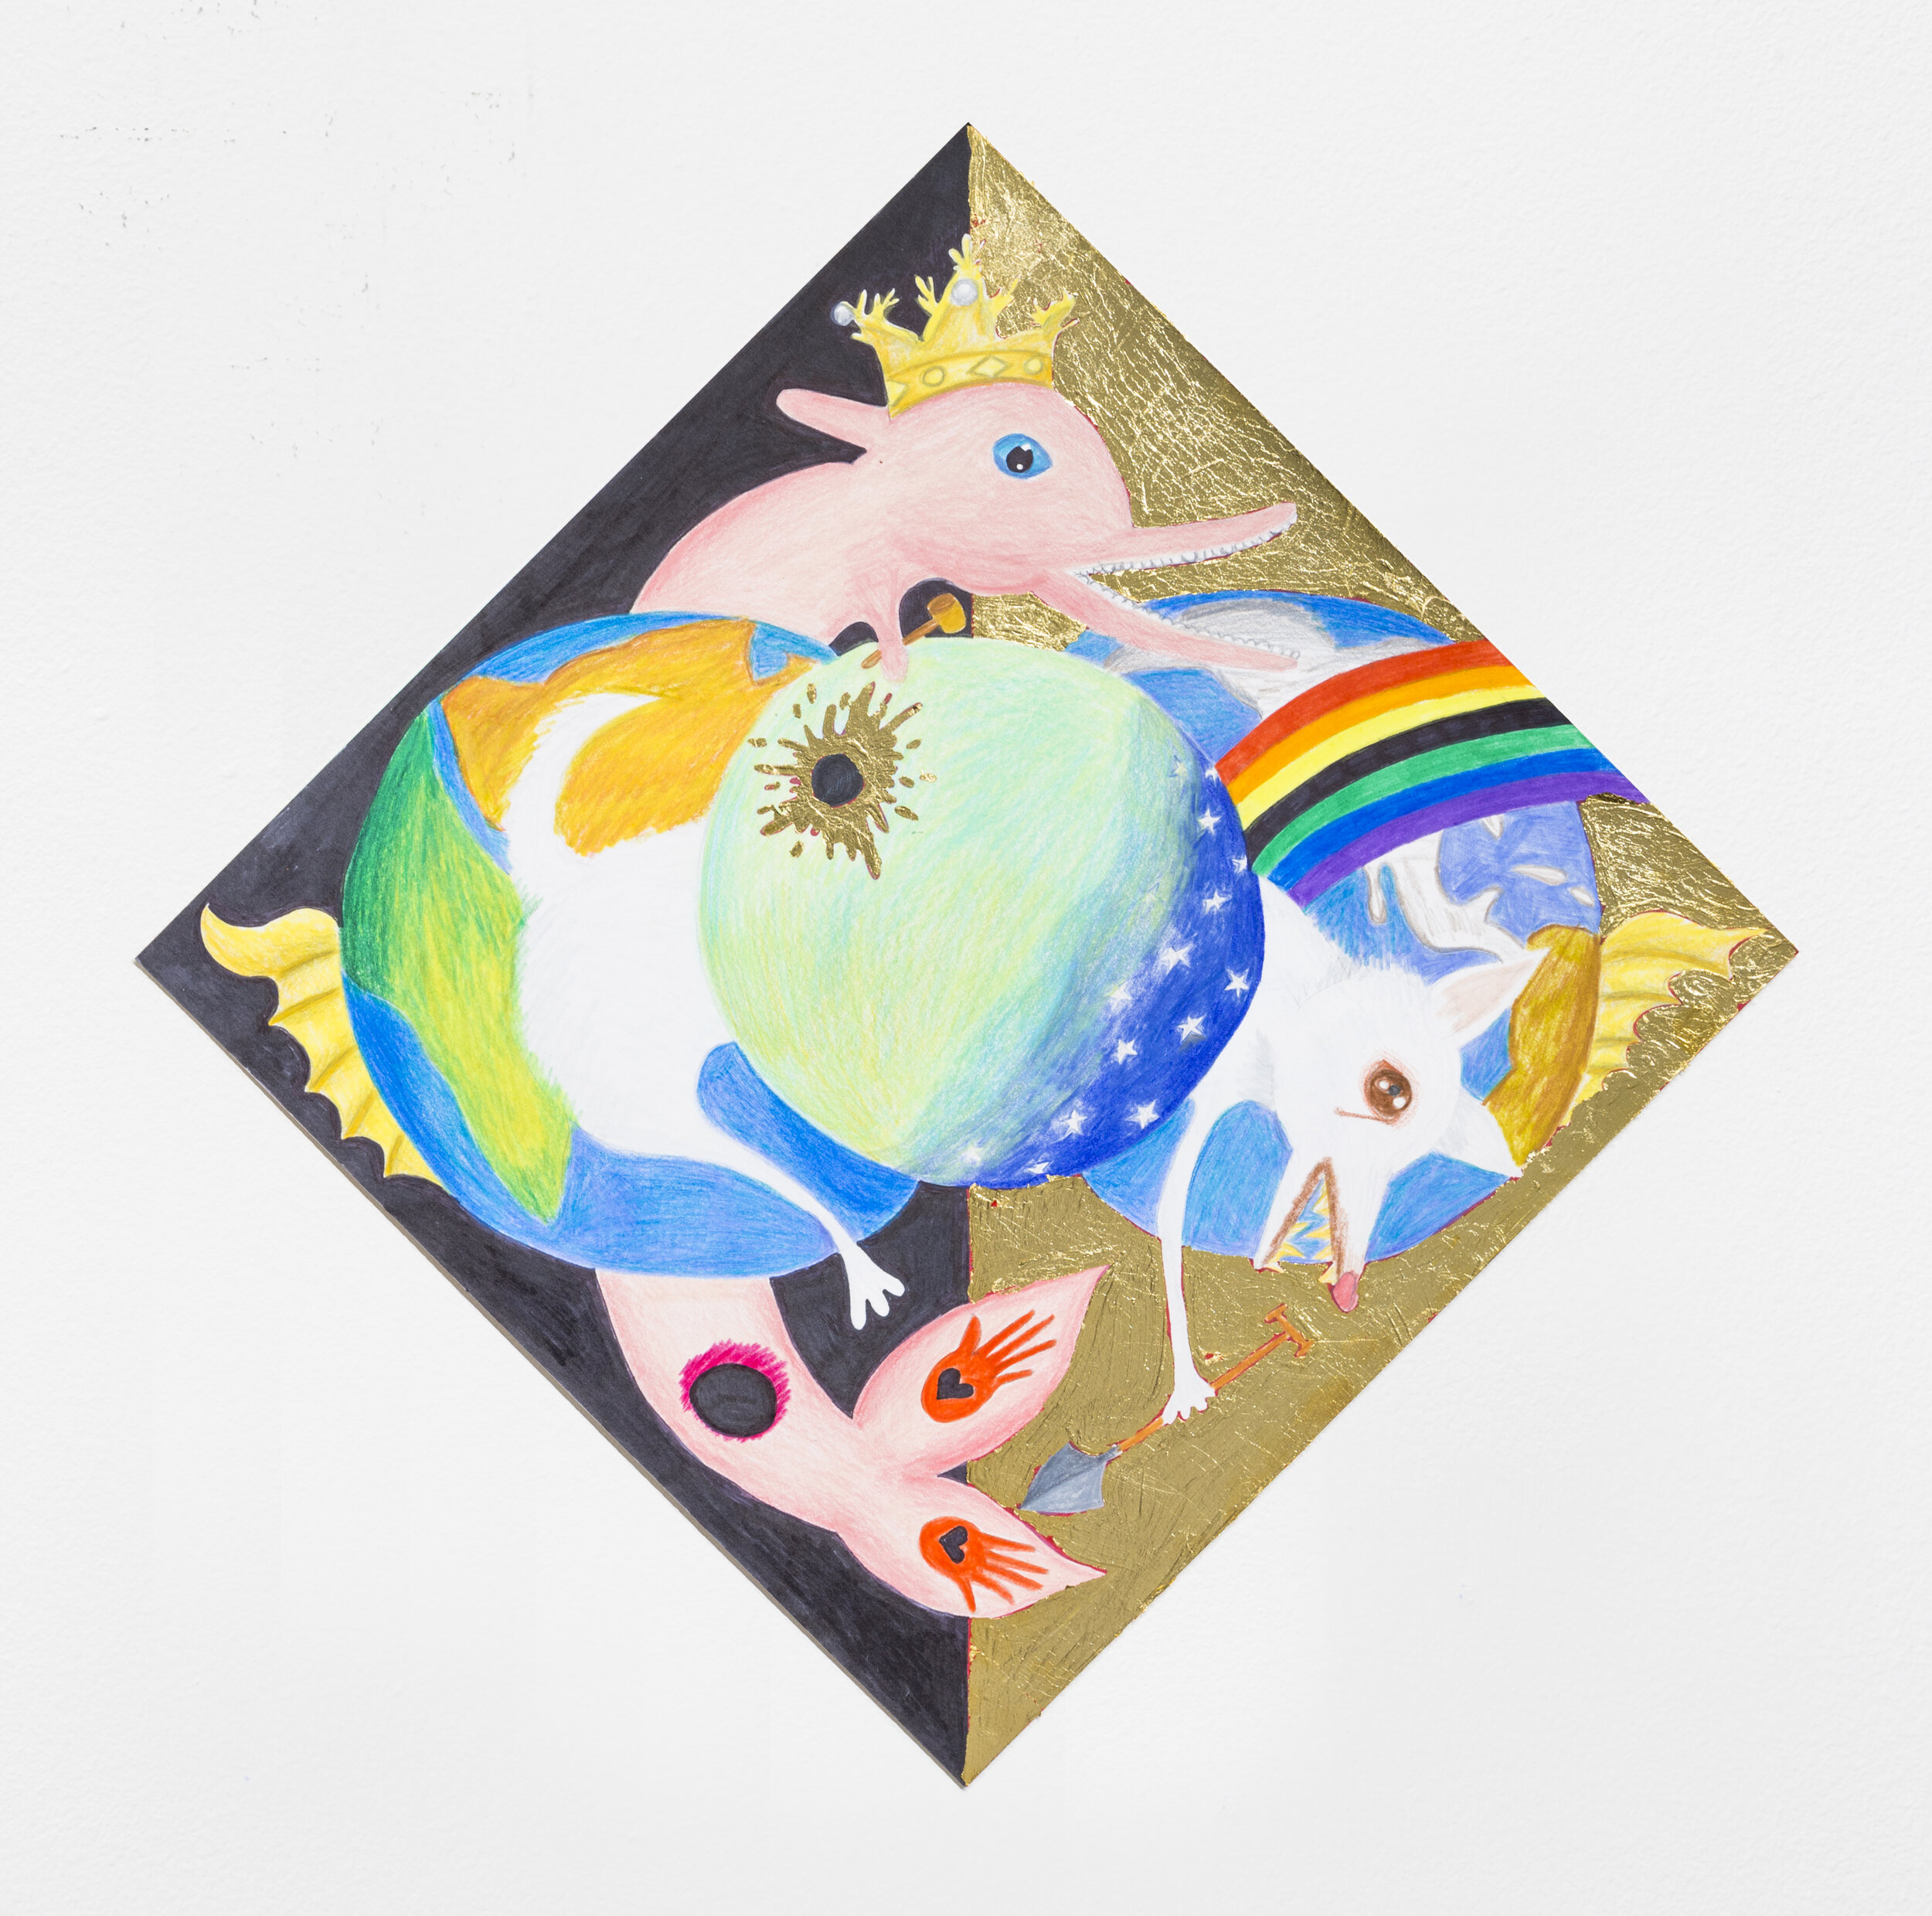   Hatchment #1 (The Forbidden Land of Argatha),  2018  11 x 11 inches (27.94 x 27.94 cm.)  Colored pencil, marker, and gold leaf on paper 